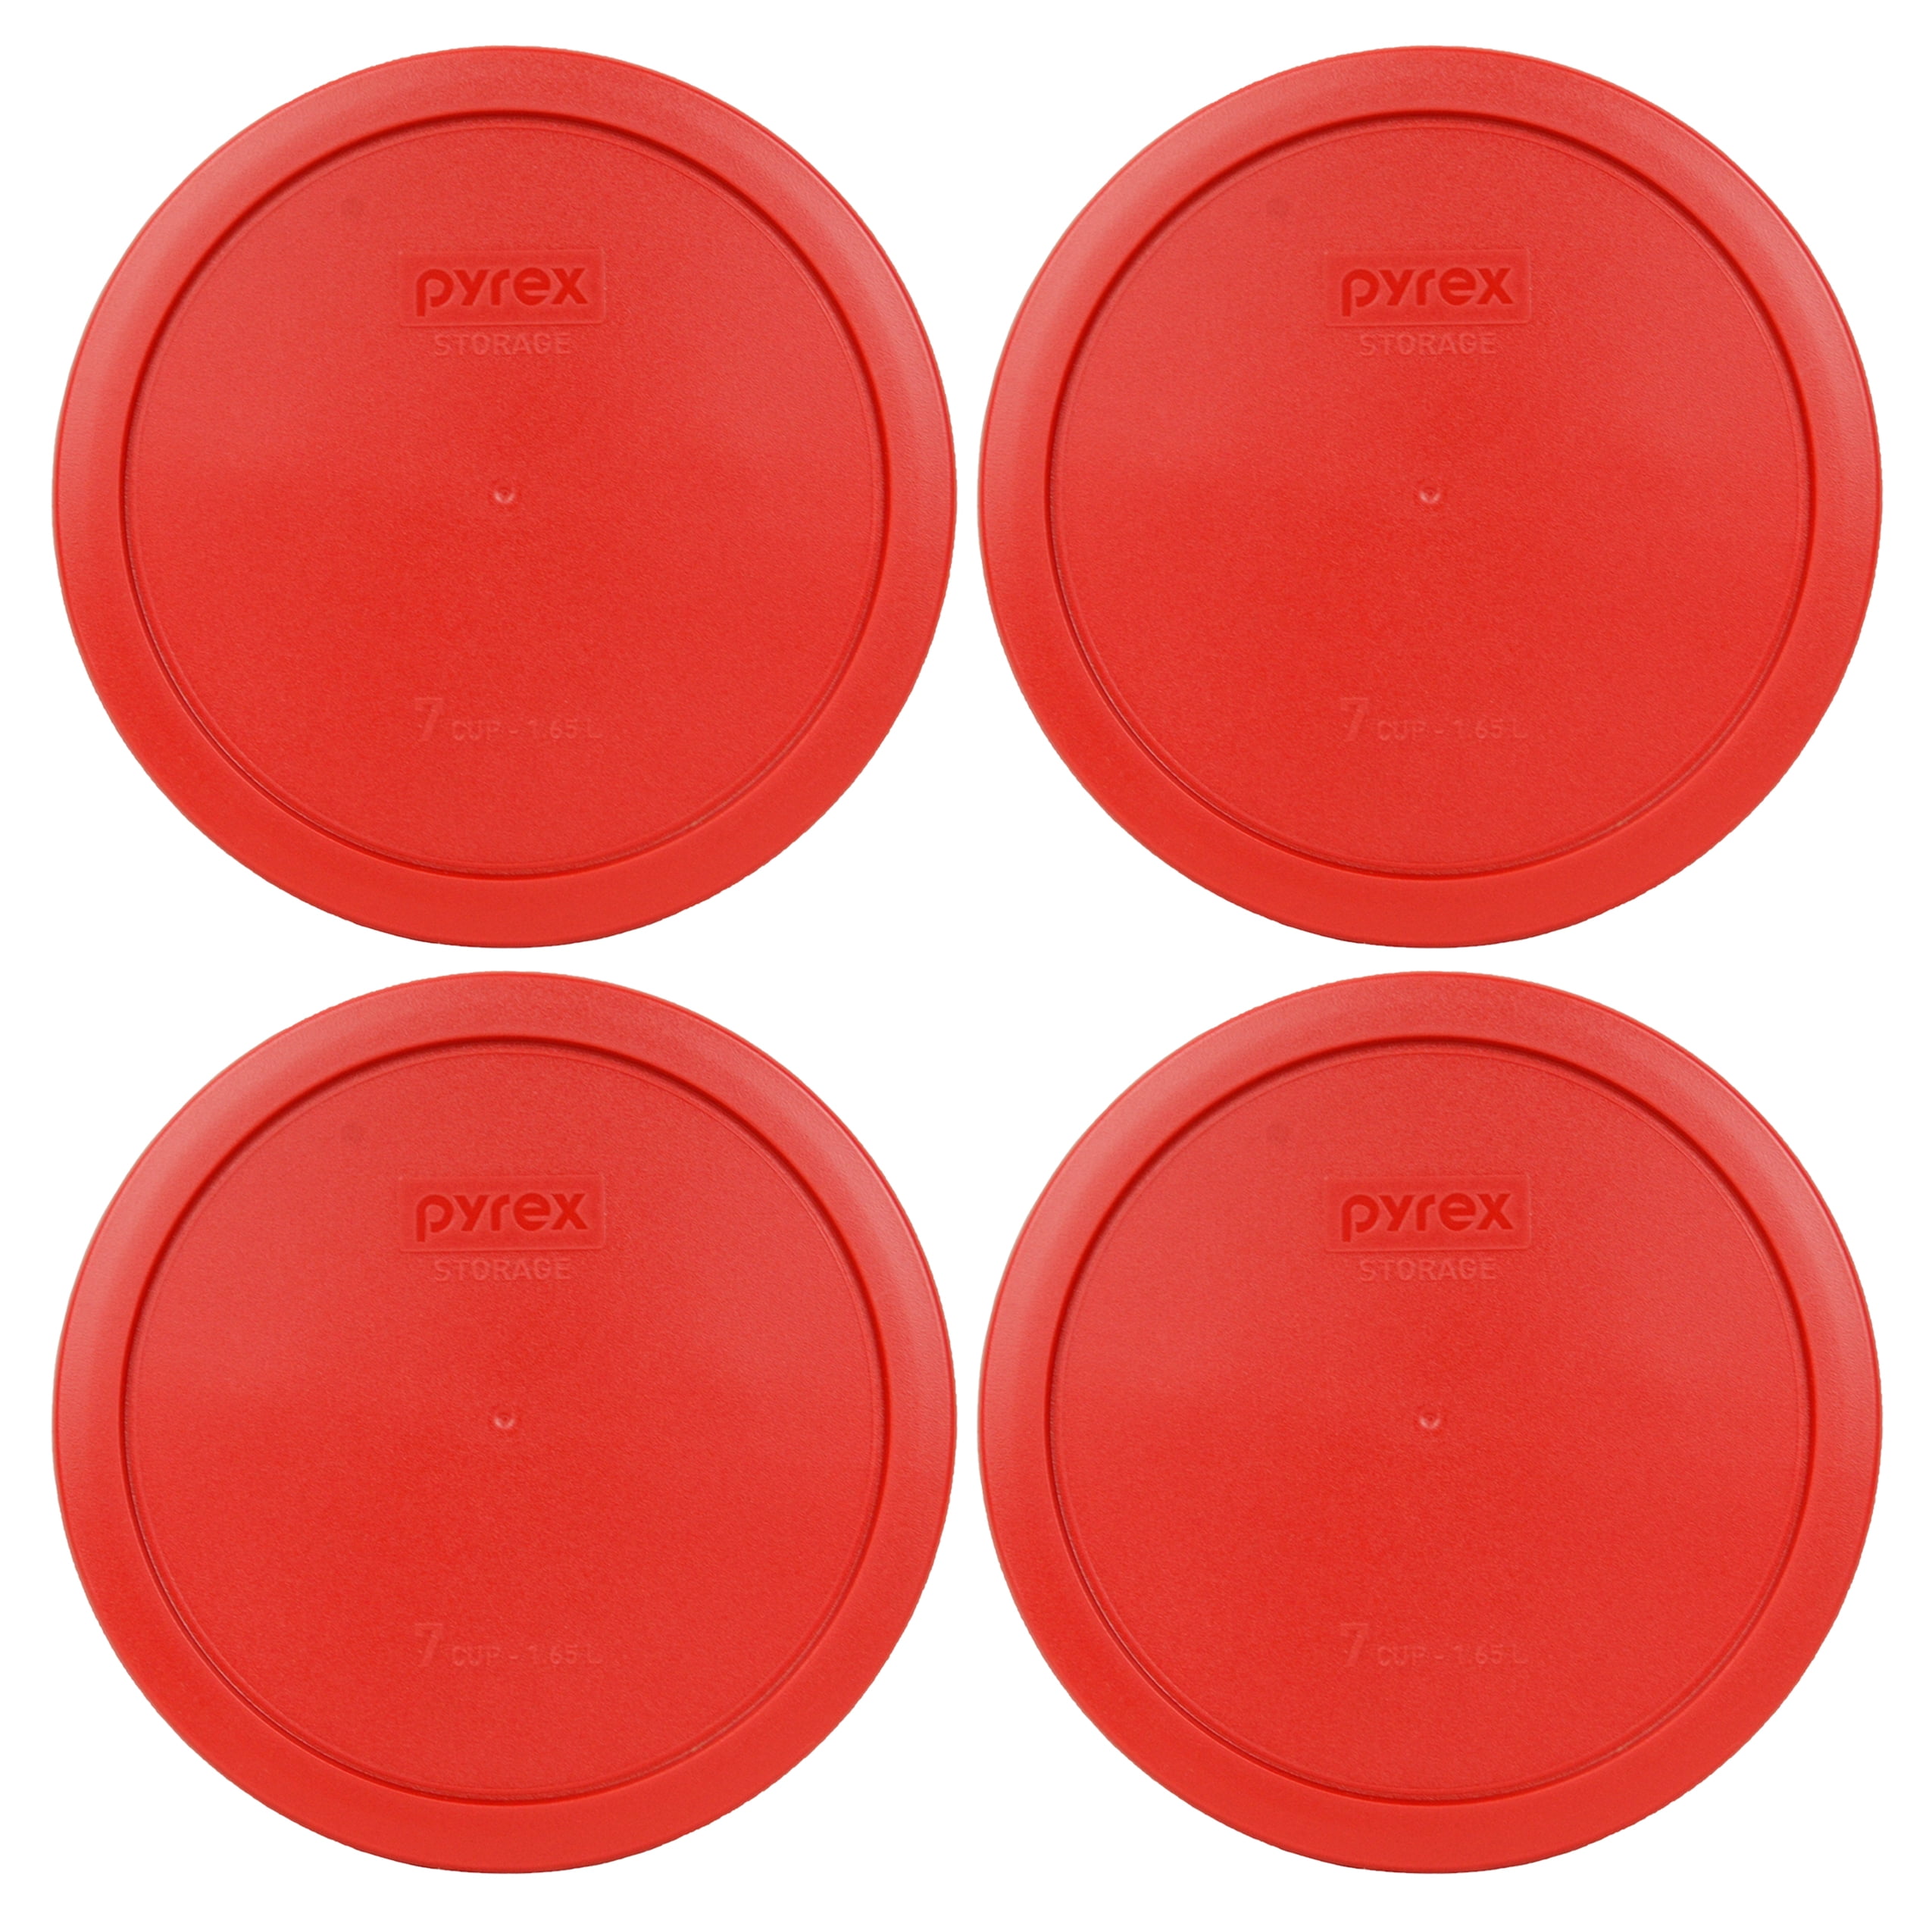 Pyrex 7203 7-Cup Round Glass Food Storage Bowl w/ 7402-PC 7-Cup Poppy Red Plastic Lid Cover